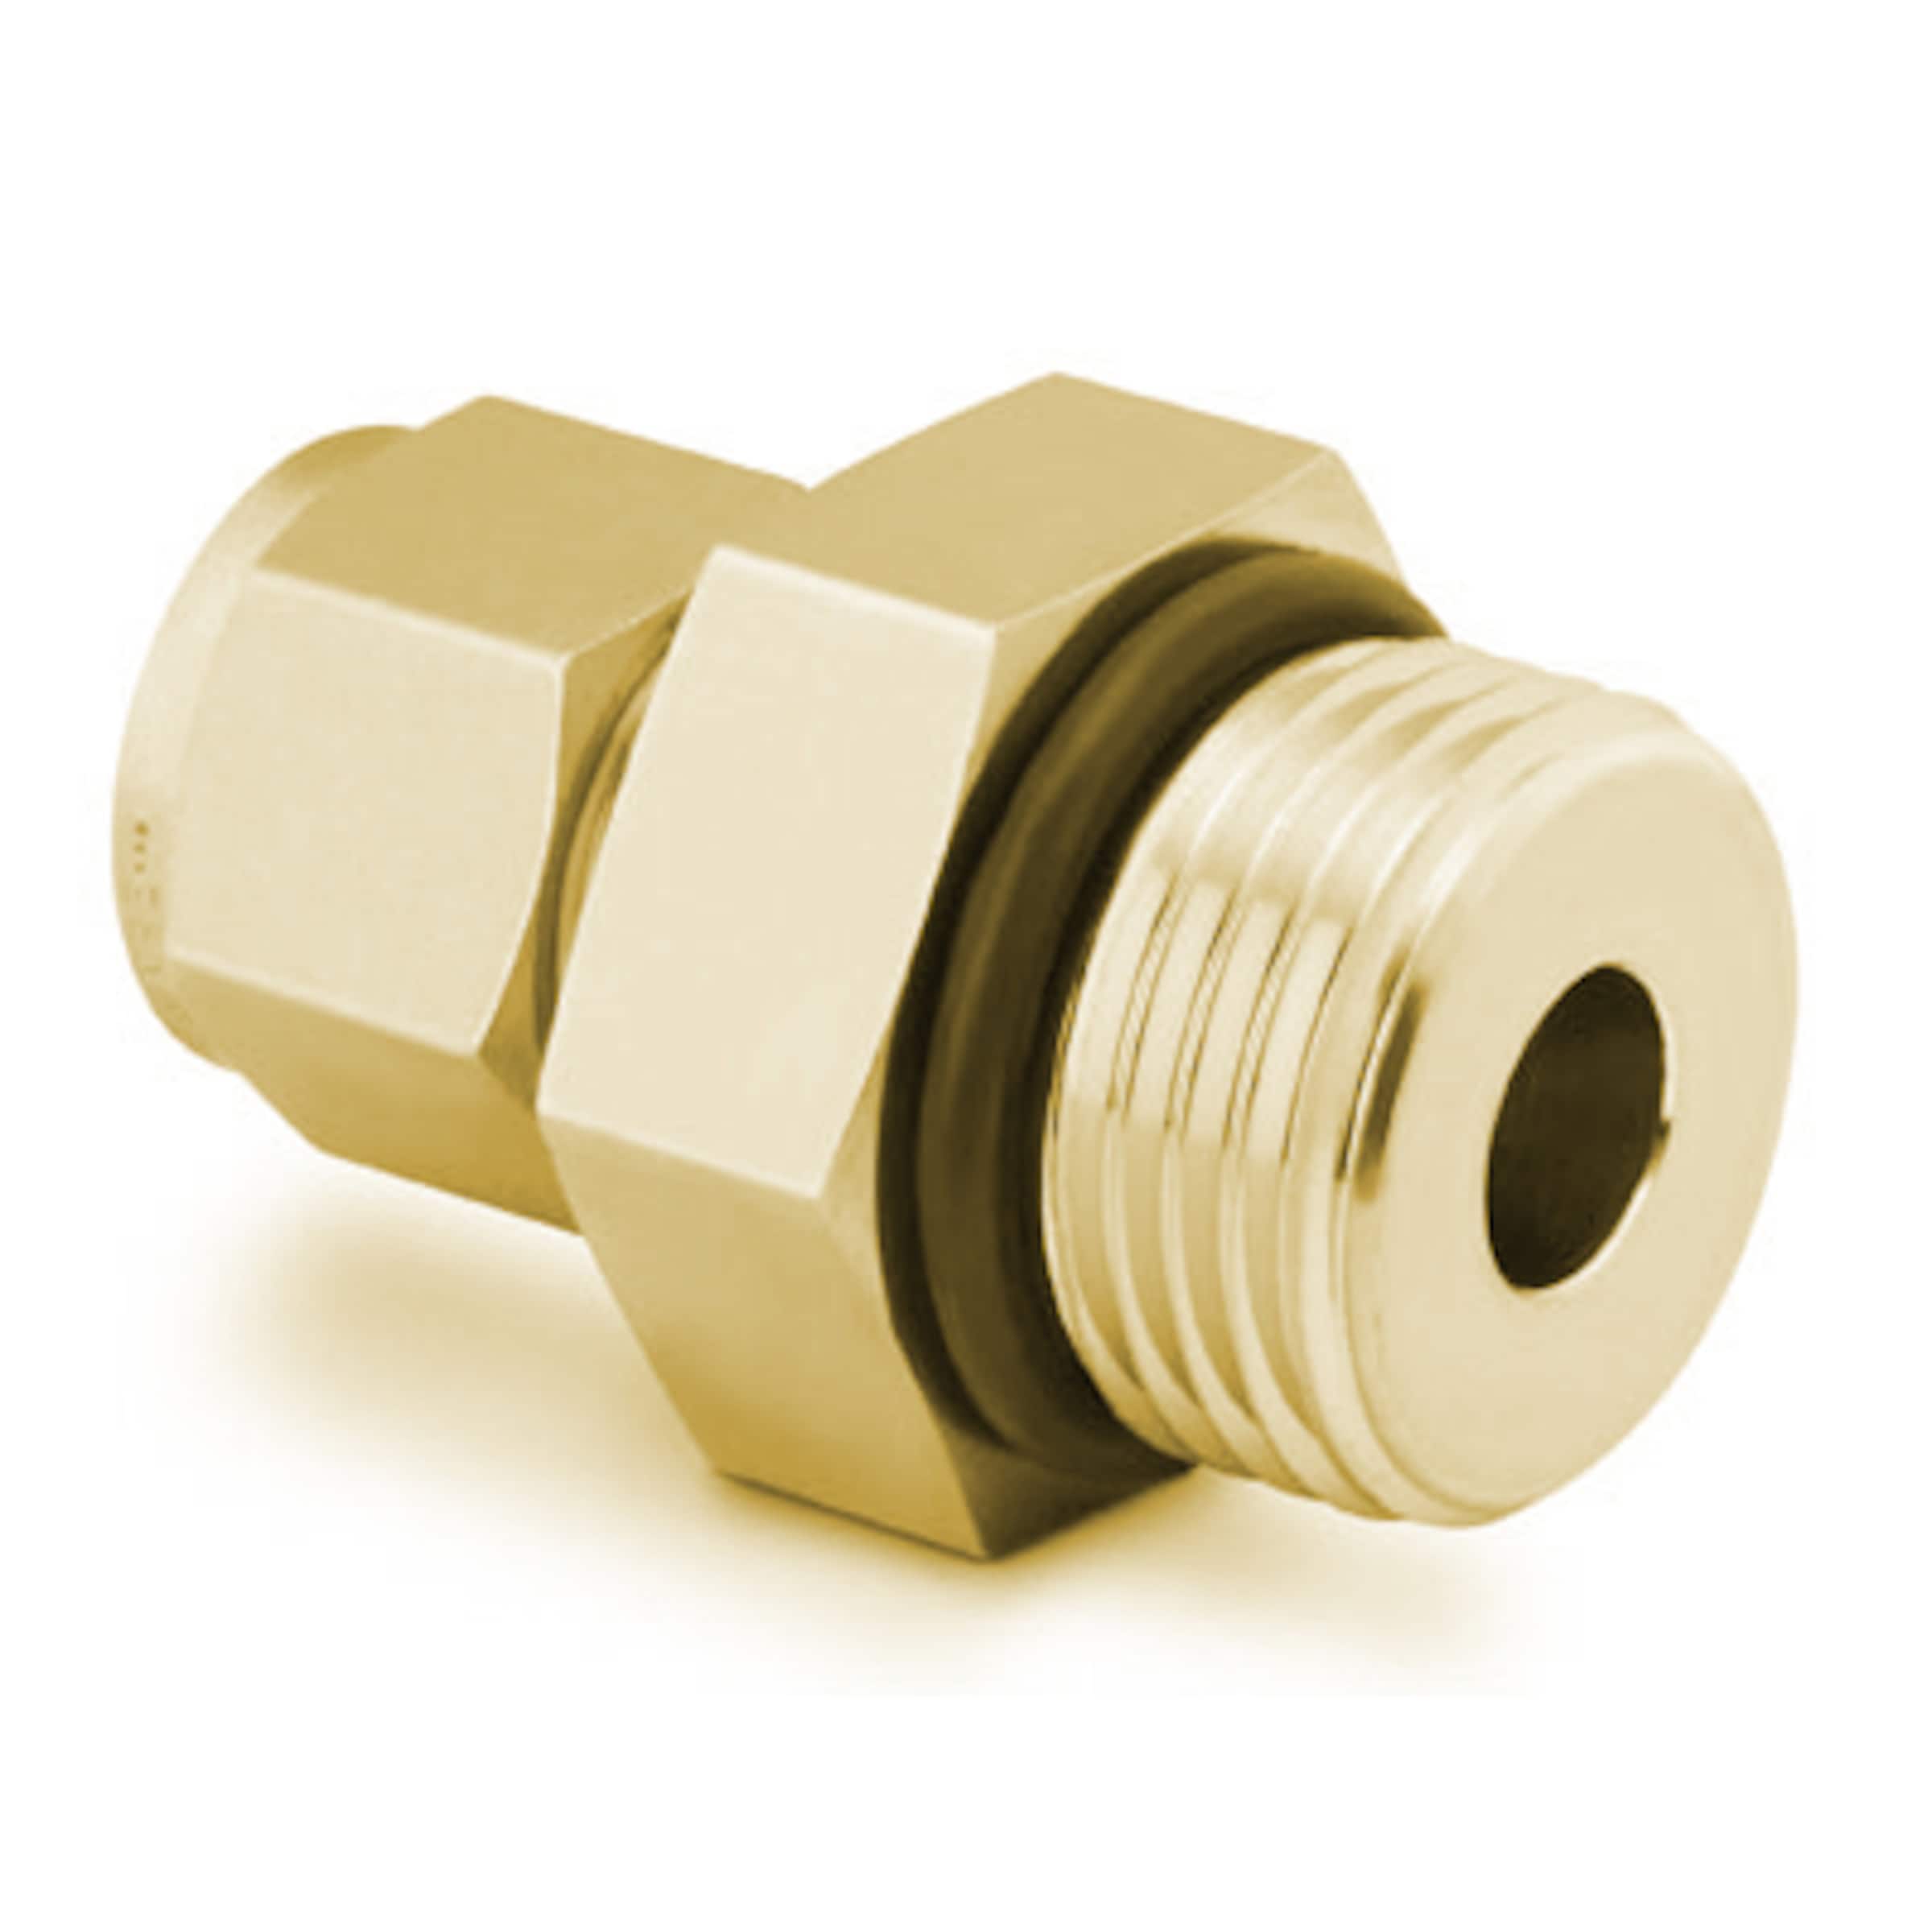 Stainless Steel Swagelok Tube Fitting, Male Connector, 3/8, 40% OFF